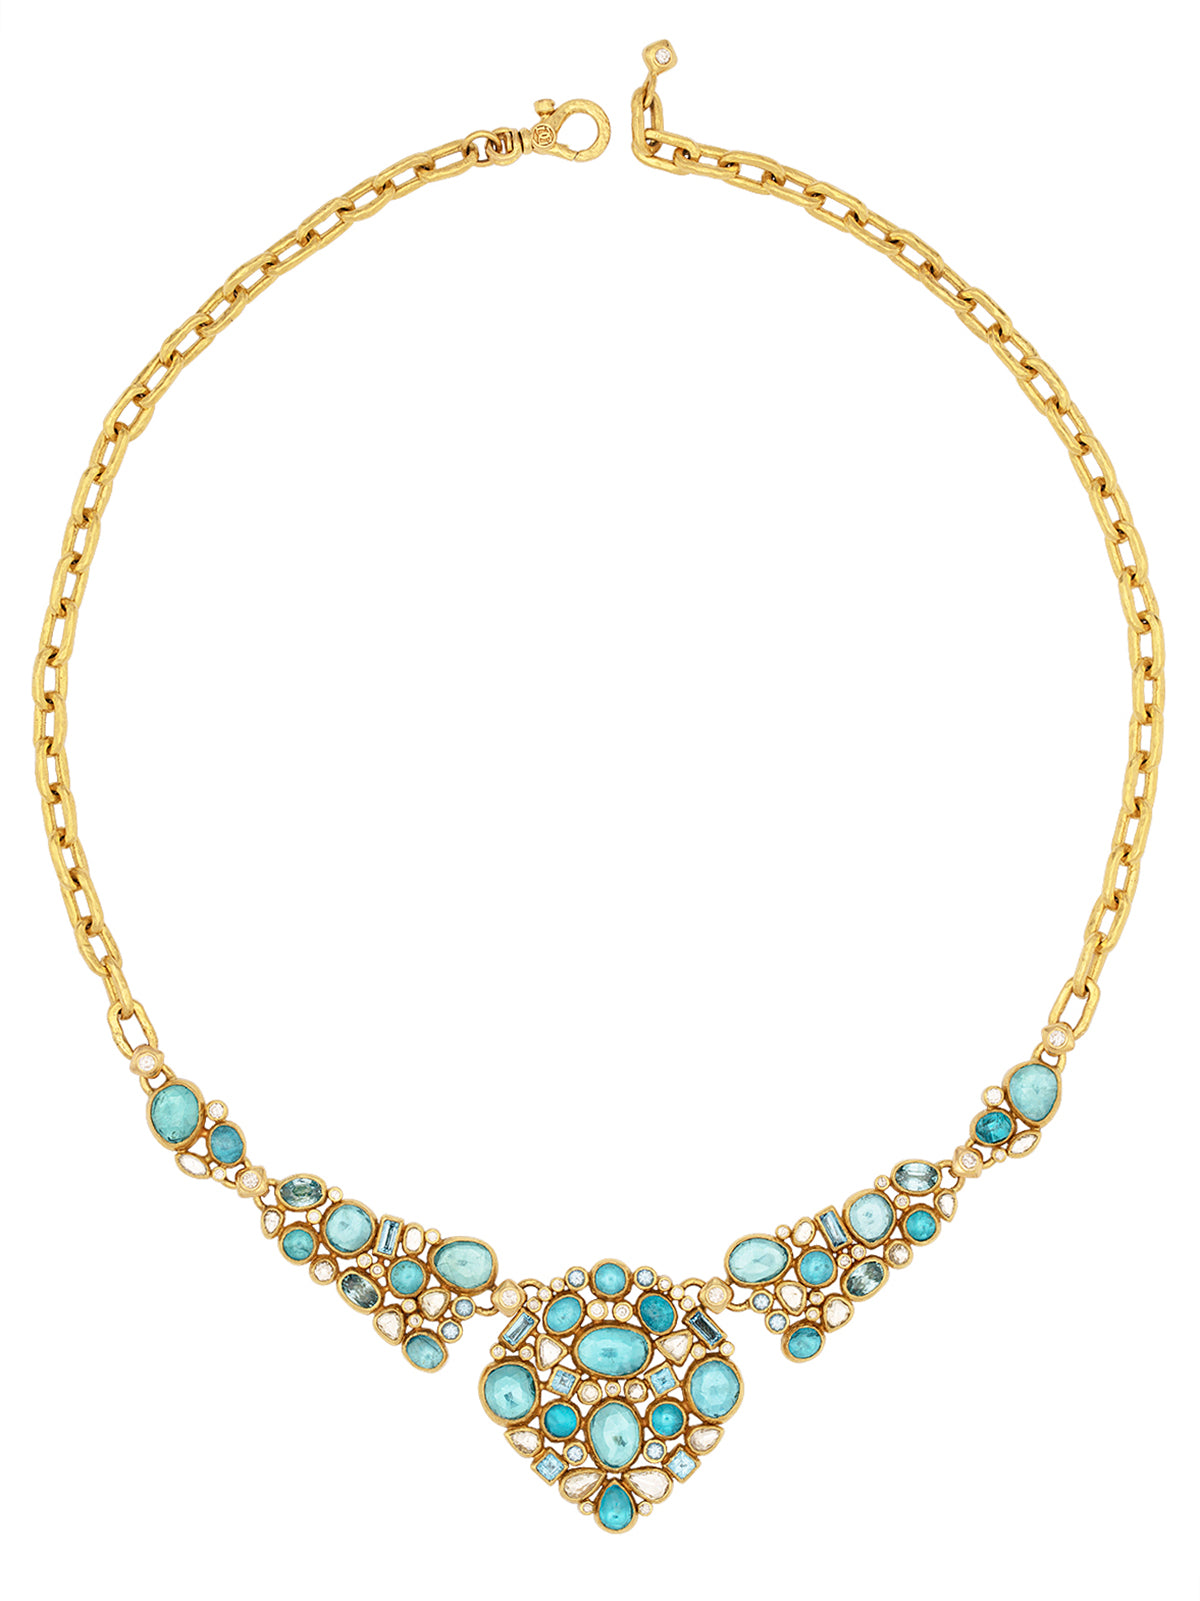 GURHAN, GURHAN Pointelle Gold Bib Short Necklace, Mixed Shaped Cluster Elements, with Mixed Blue Stones